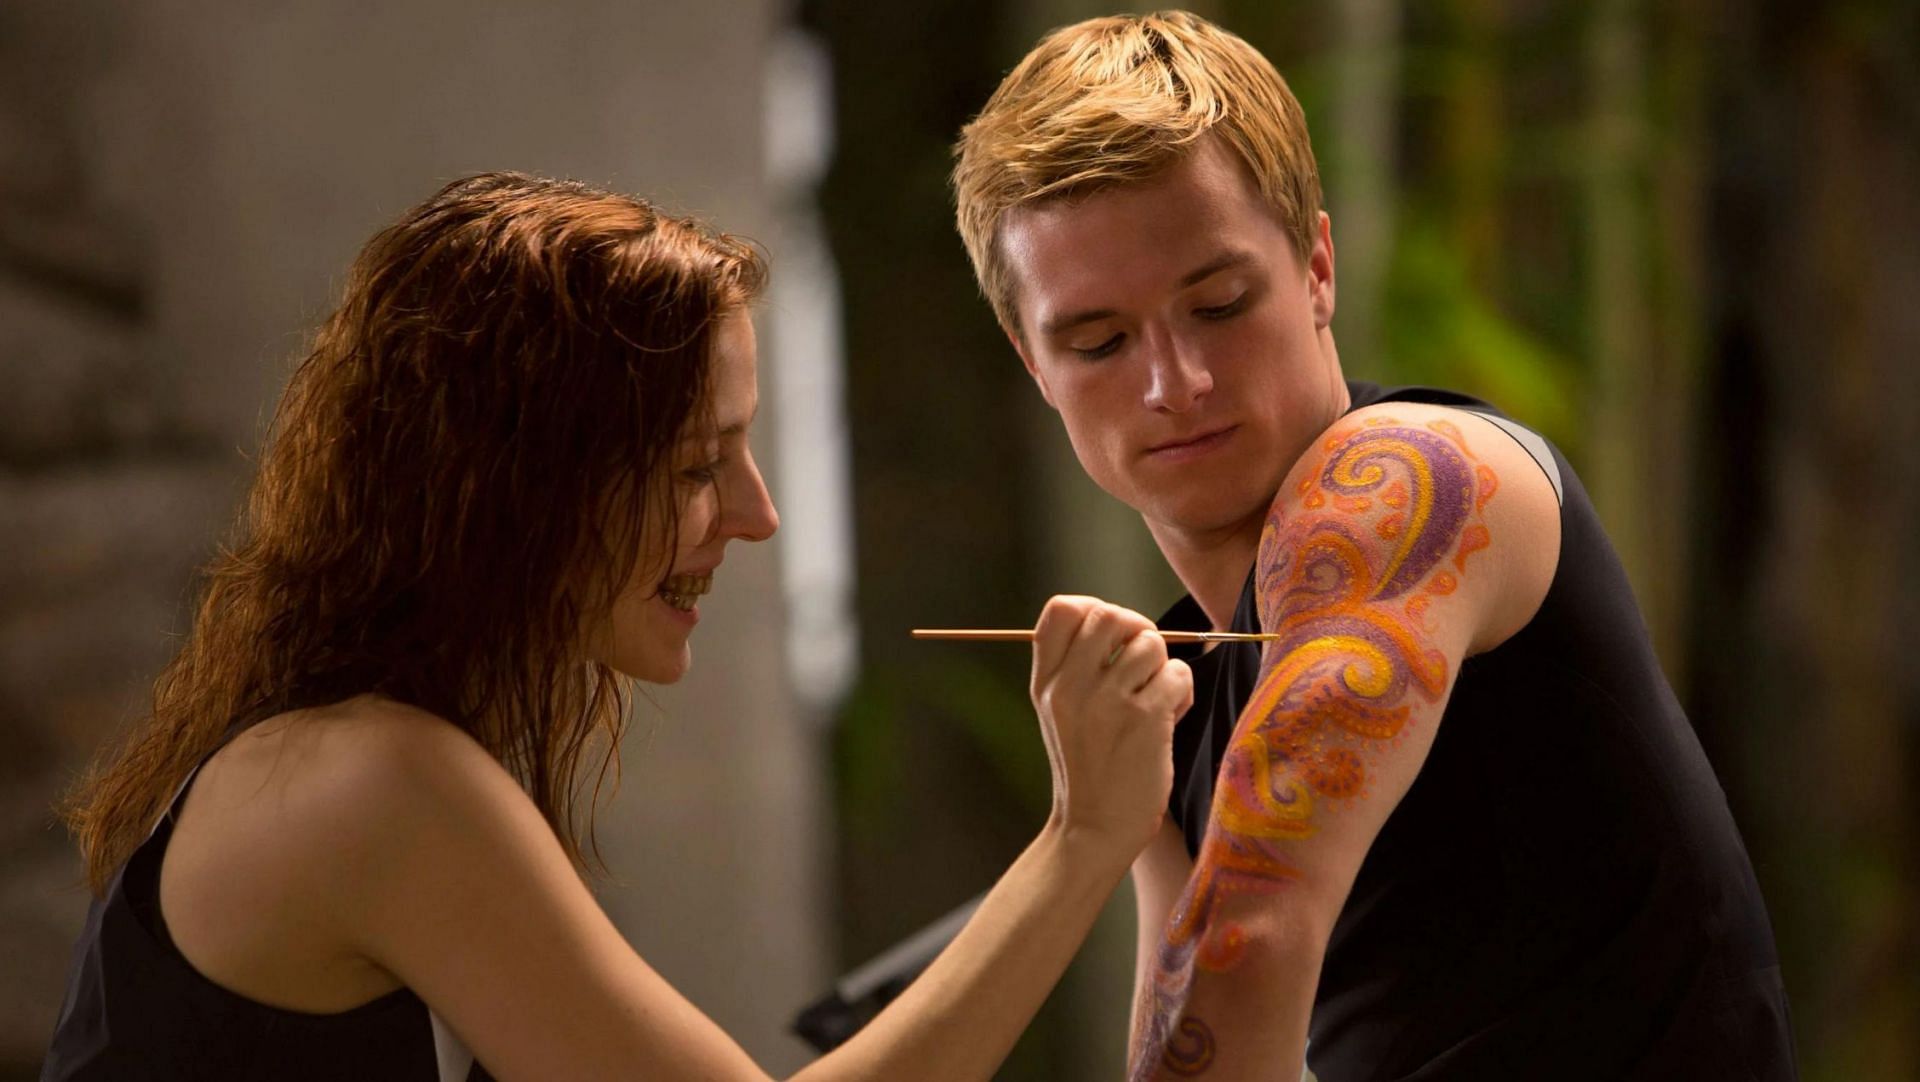 Compassion and sacrifice in the face of darkness: Exploring the character of Morphling in The Hunger Games (Image via Lionsgate)